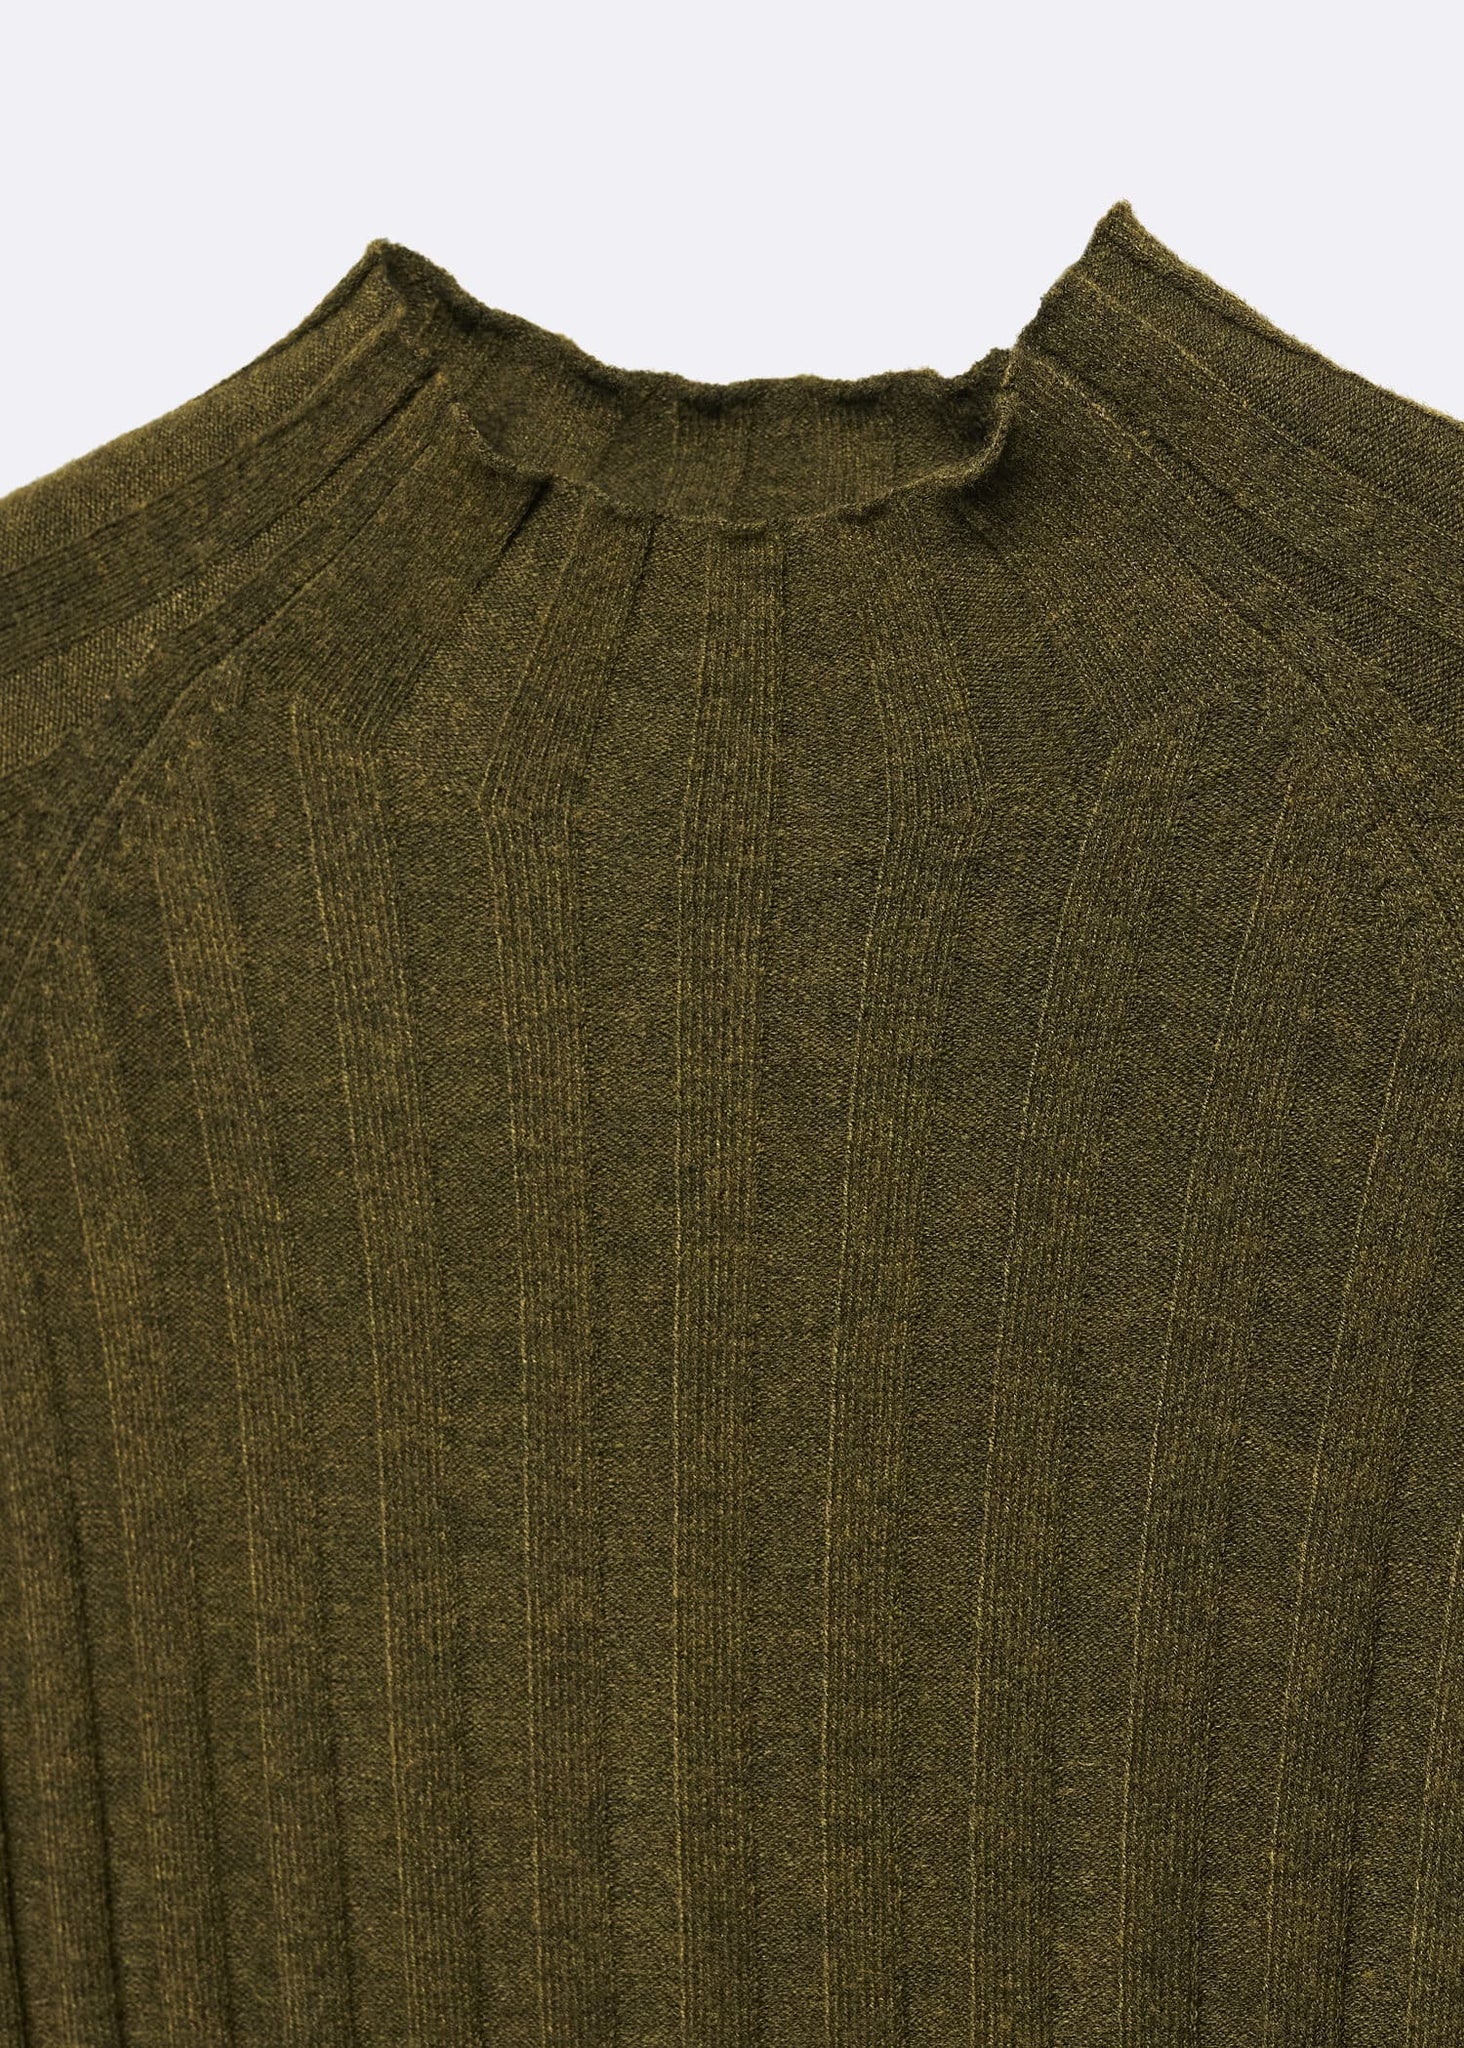 Perkins-neck ribbed dress - Details of the article 8